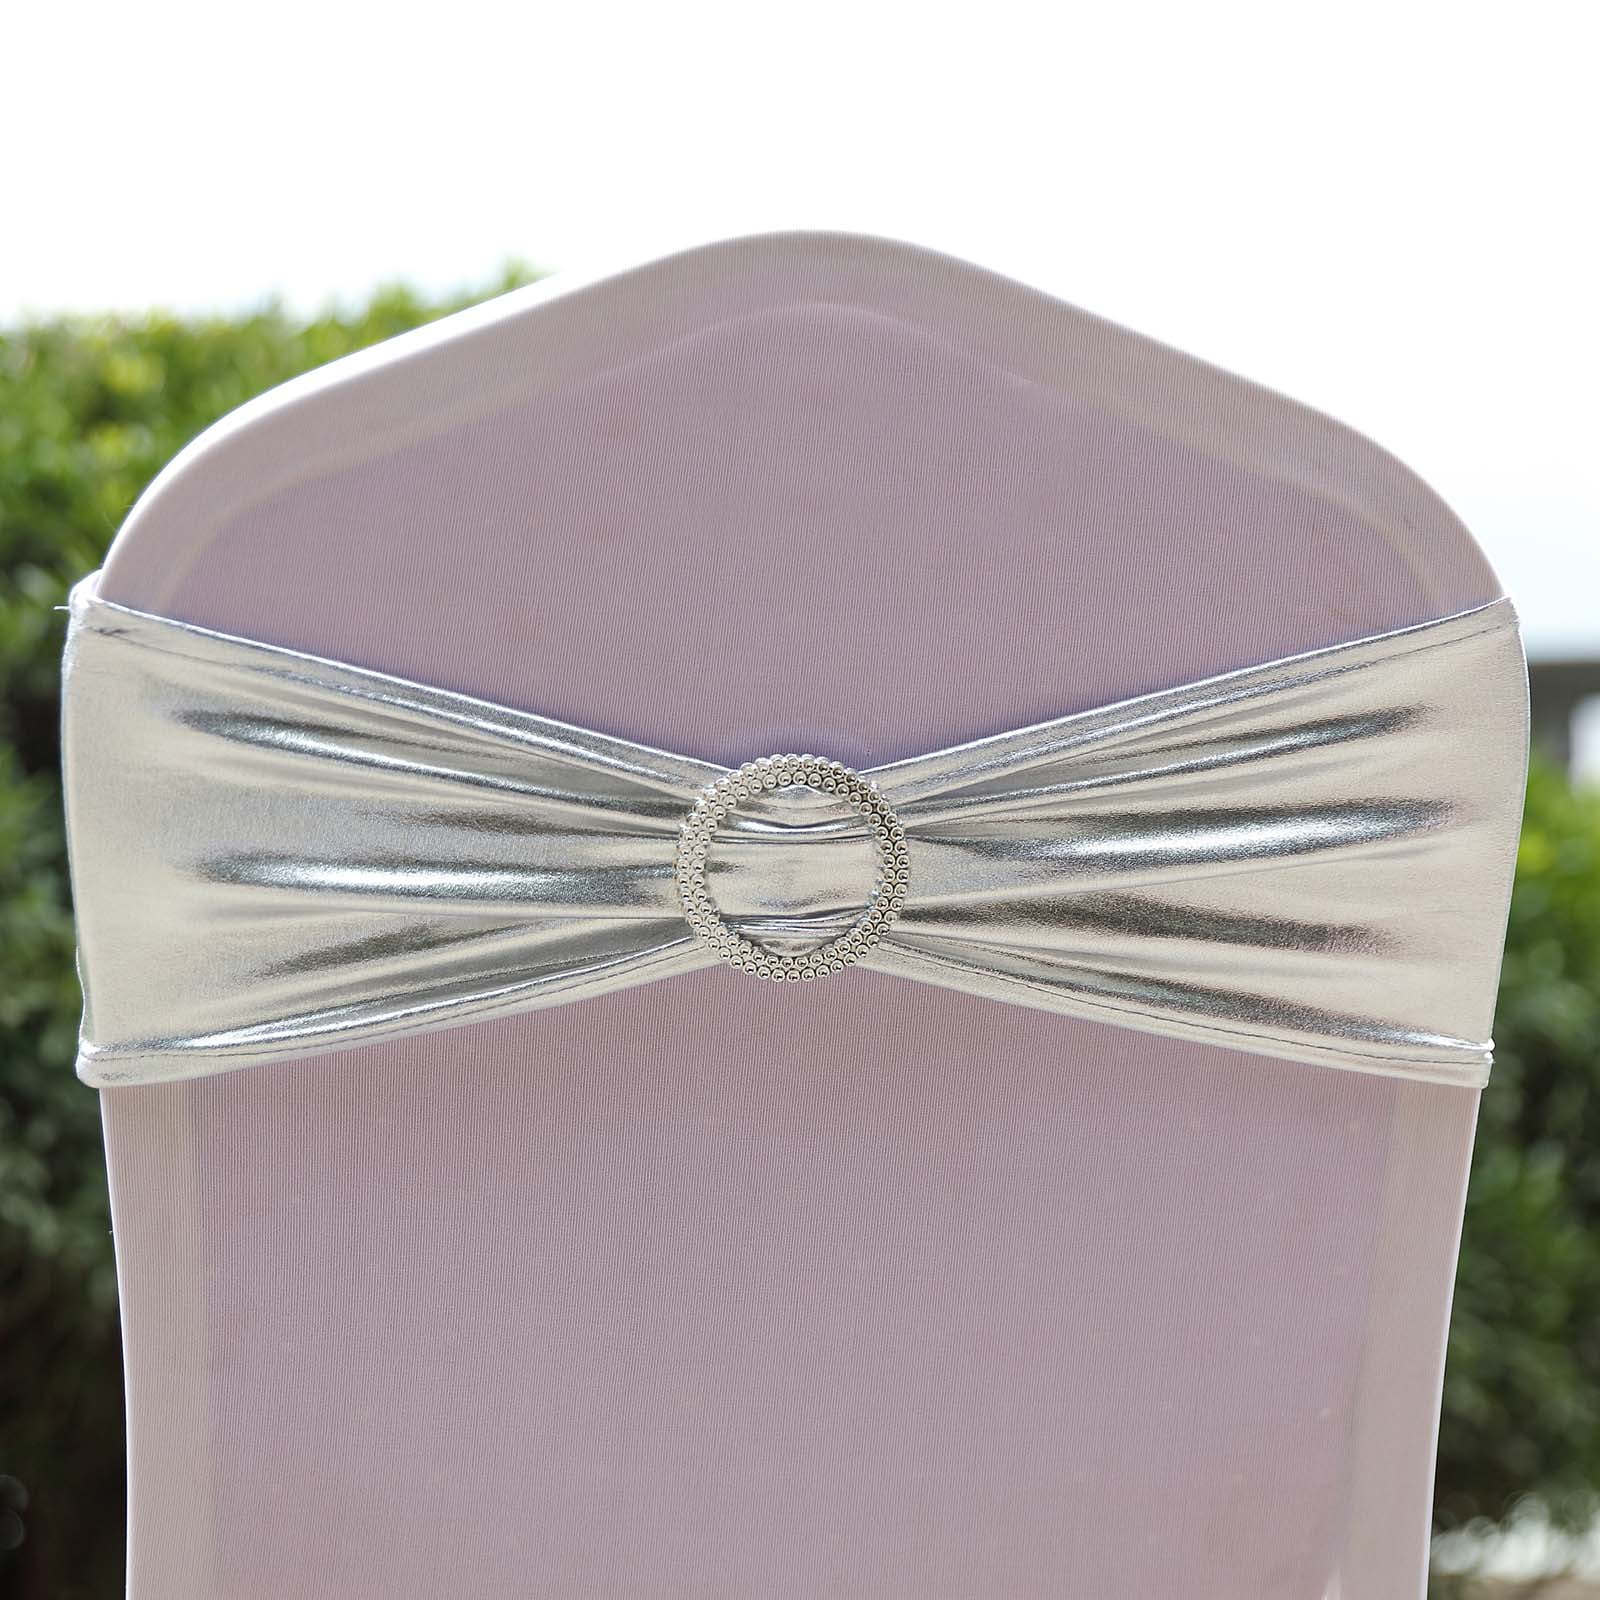 Details about   Chair Cover Band Spandex Stretch Sash Bow Wedding Party Banquet Decoration New 